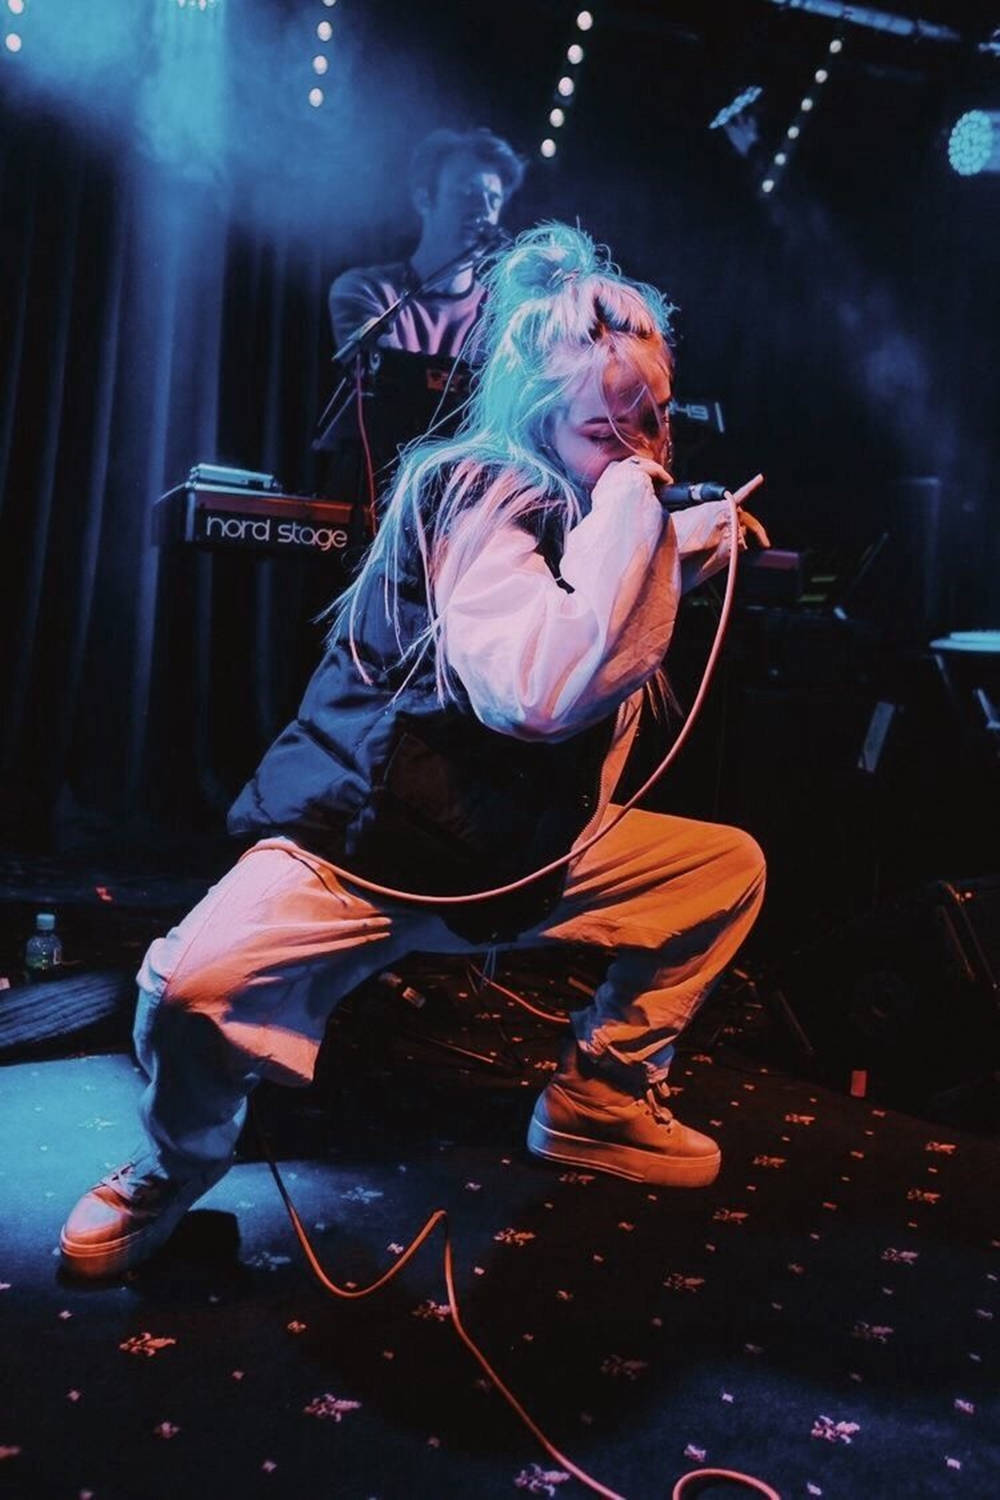 Aesthetic Billie Eilish Performing With Band